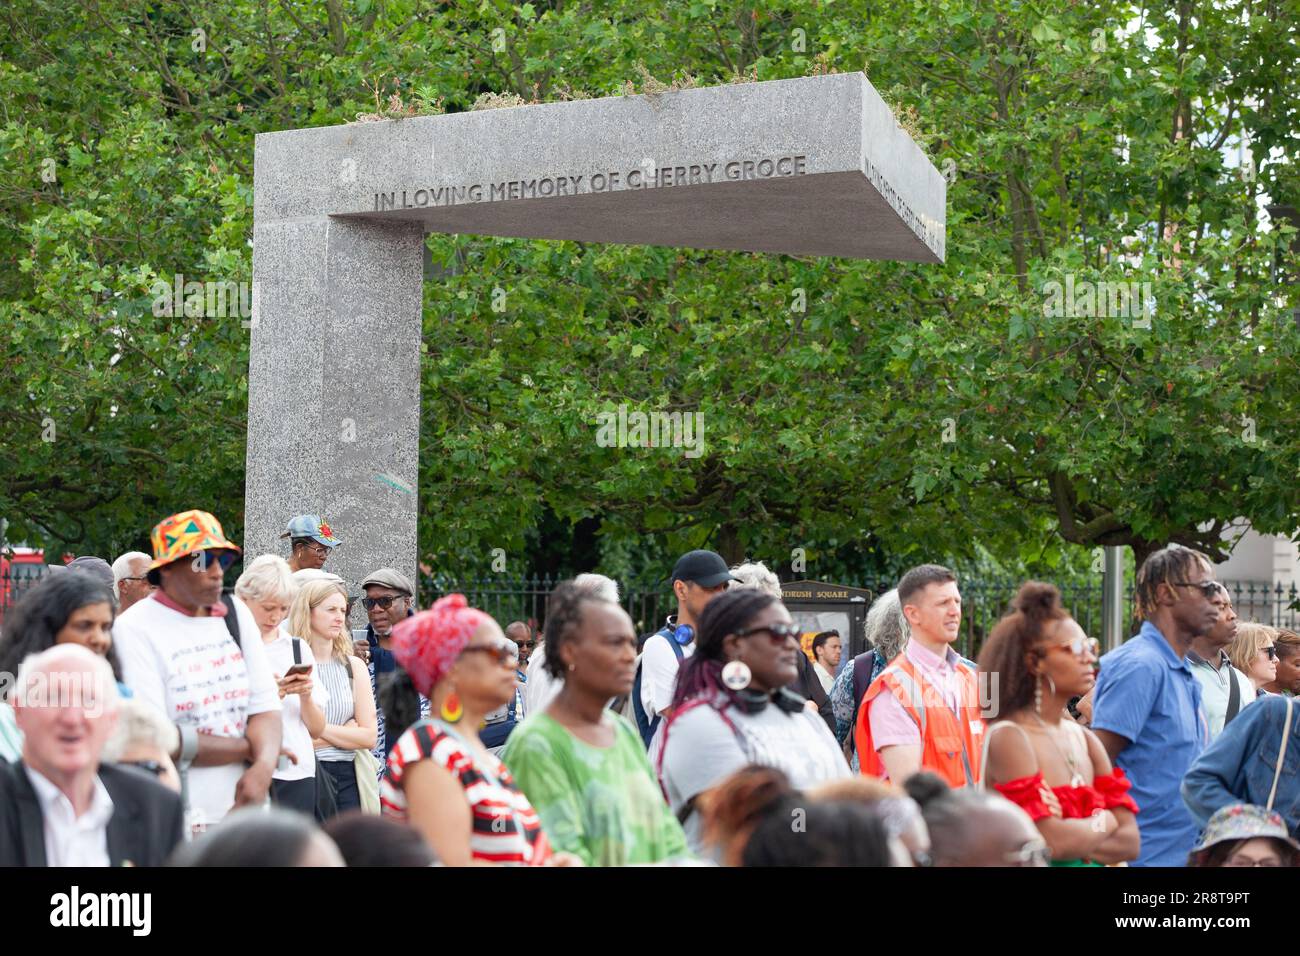 London, UK. 23rd June, 2023. A procession through Brixton, then speeches and performances in Windrush Square, marked the 75th anniversary of the Empire Windrush docking at Tilbury. The memorial to Cherry Groce serves as a reminder of the unfair treatment the Black community have often received in this country. Credit: Anna Watson/Alamy Live News Stock Photo